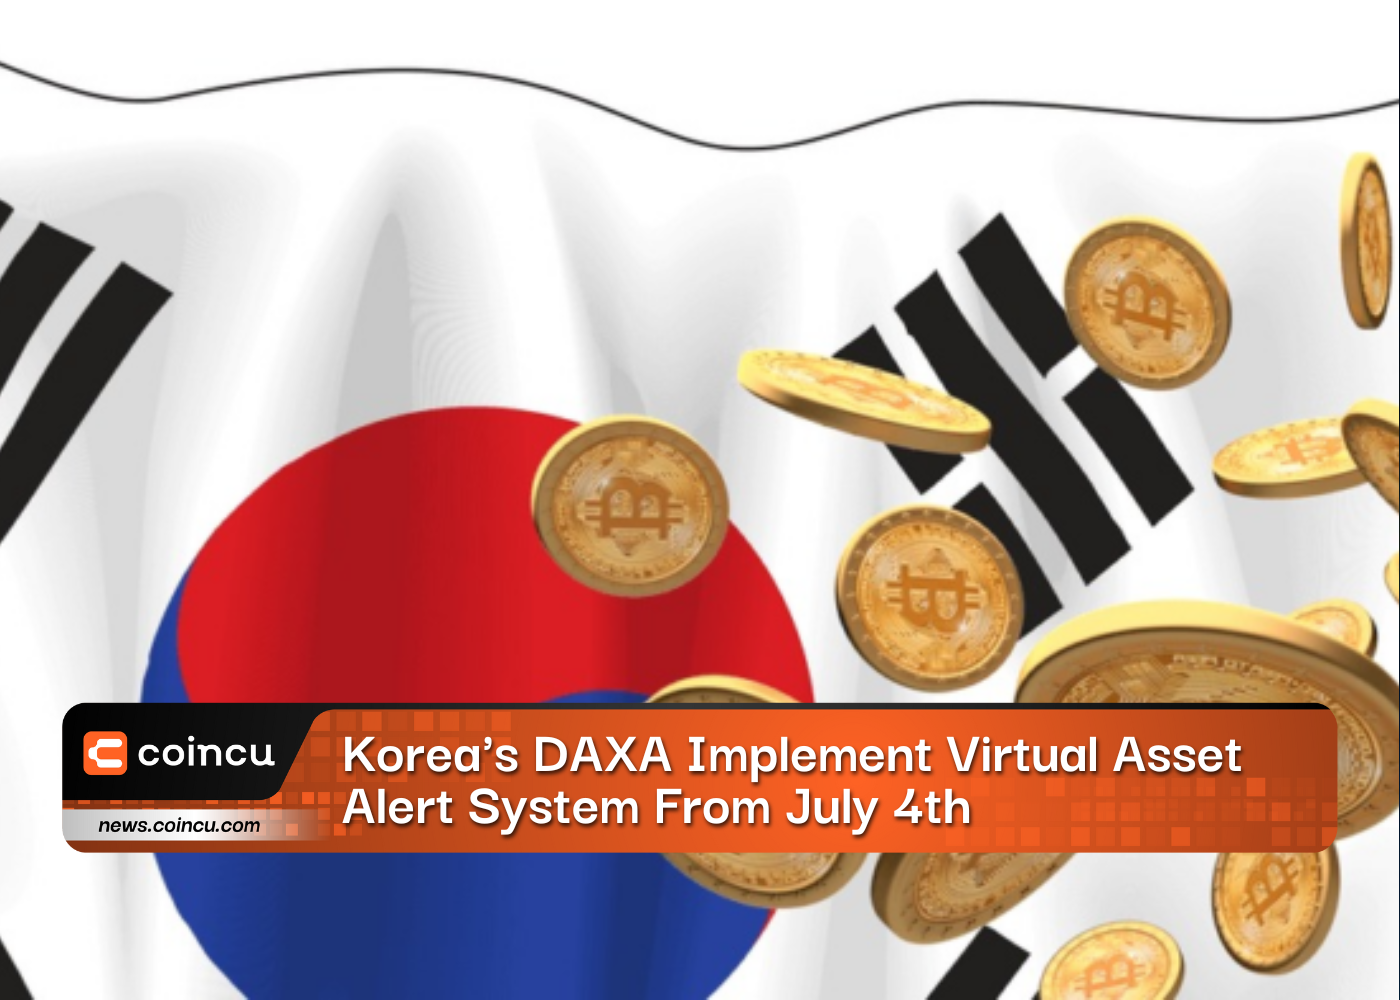 Korea's DAXA Implement Virtual Asset Alert System From July 4th